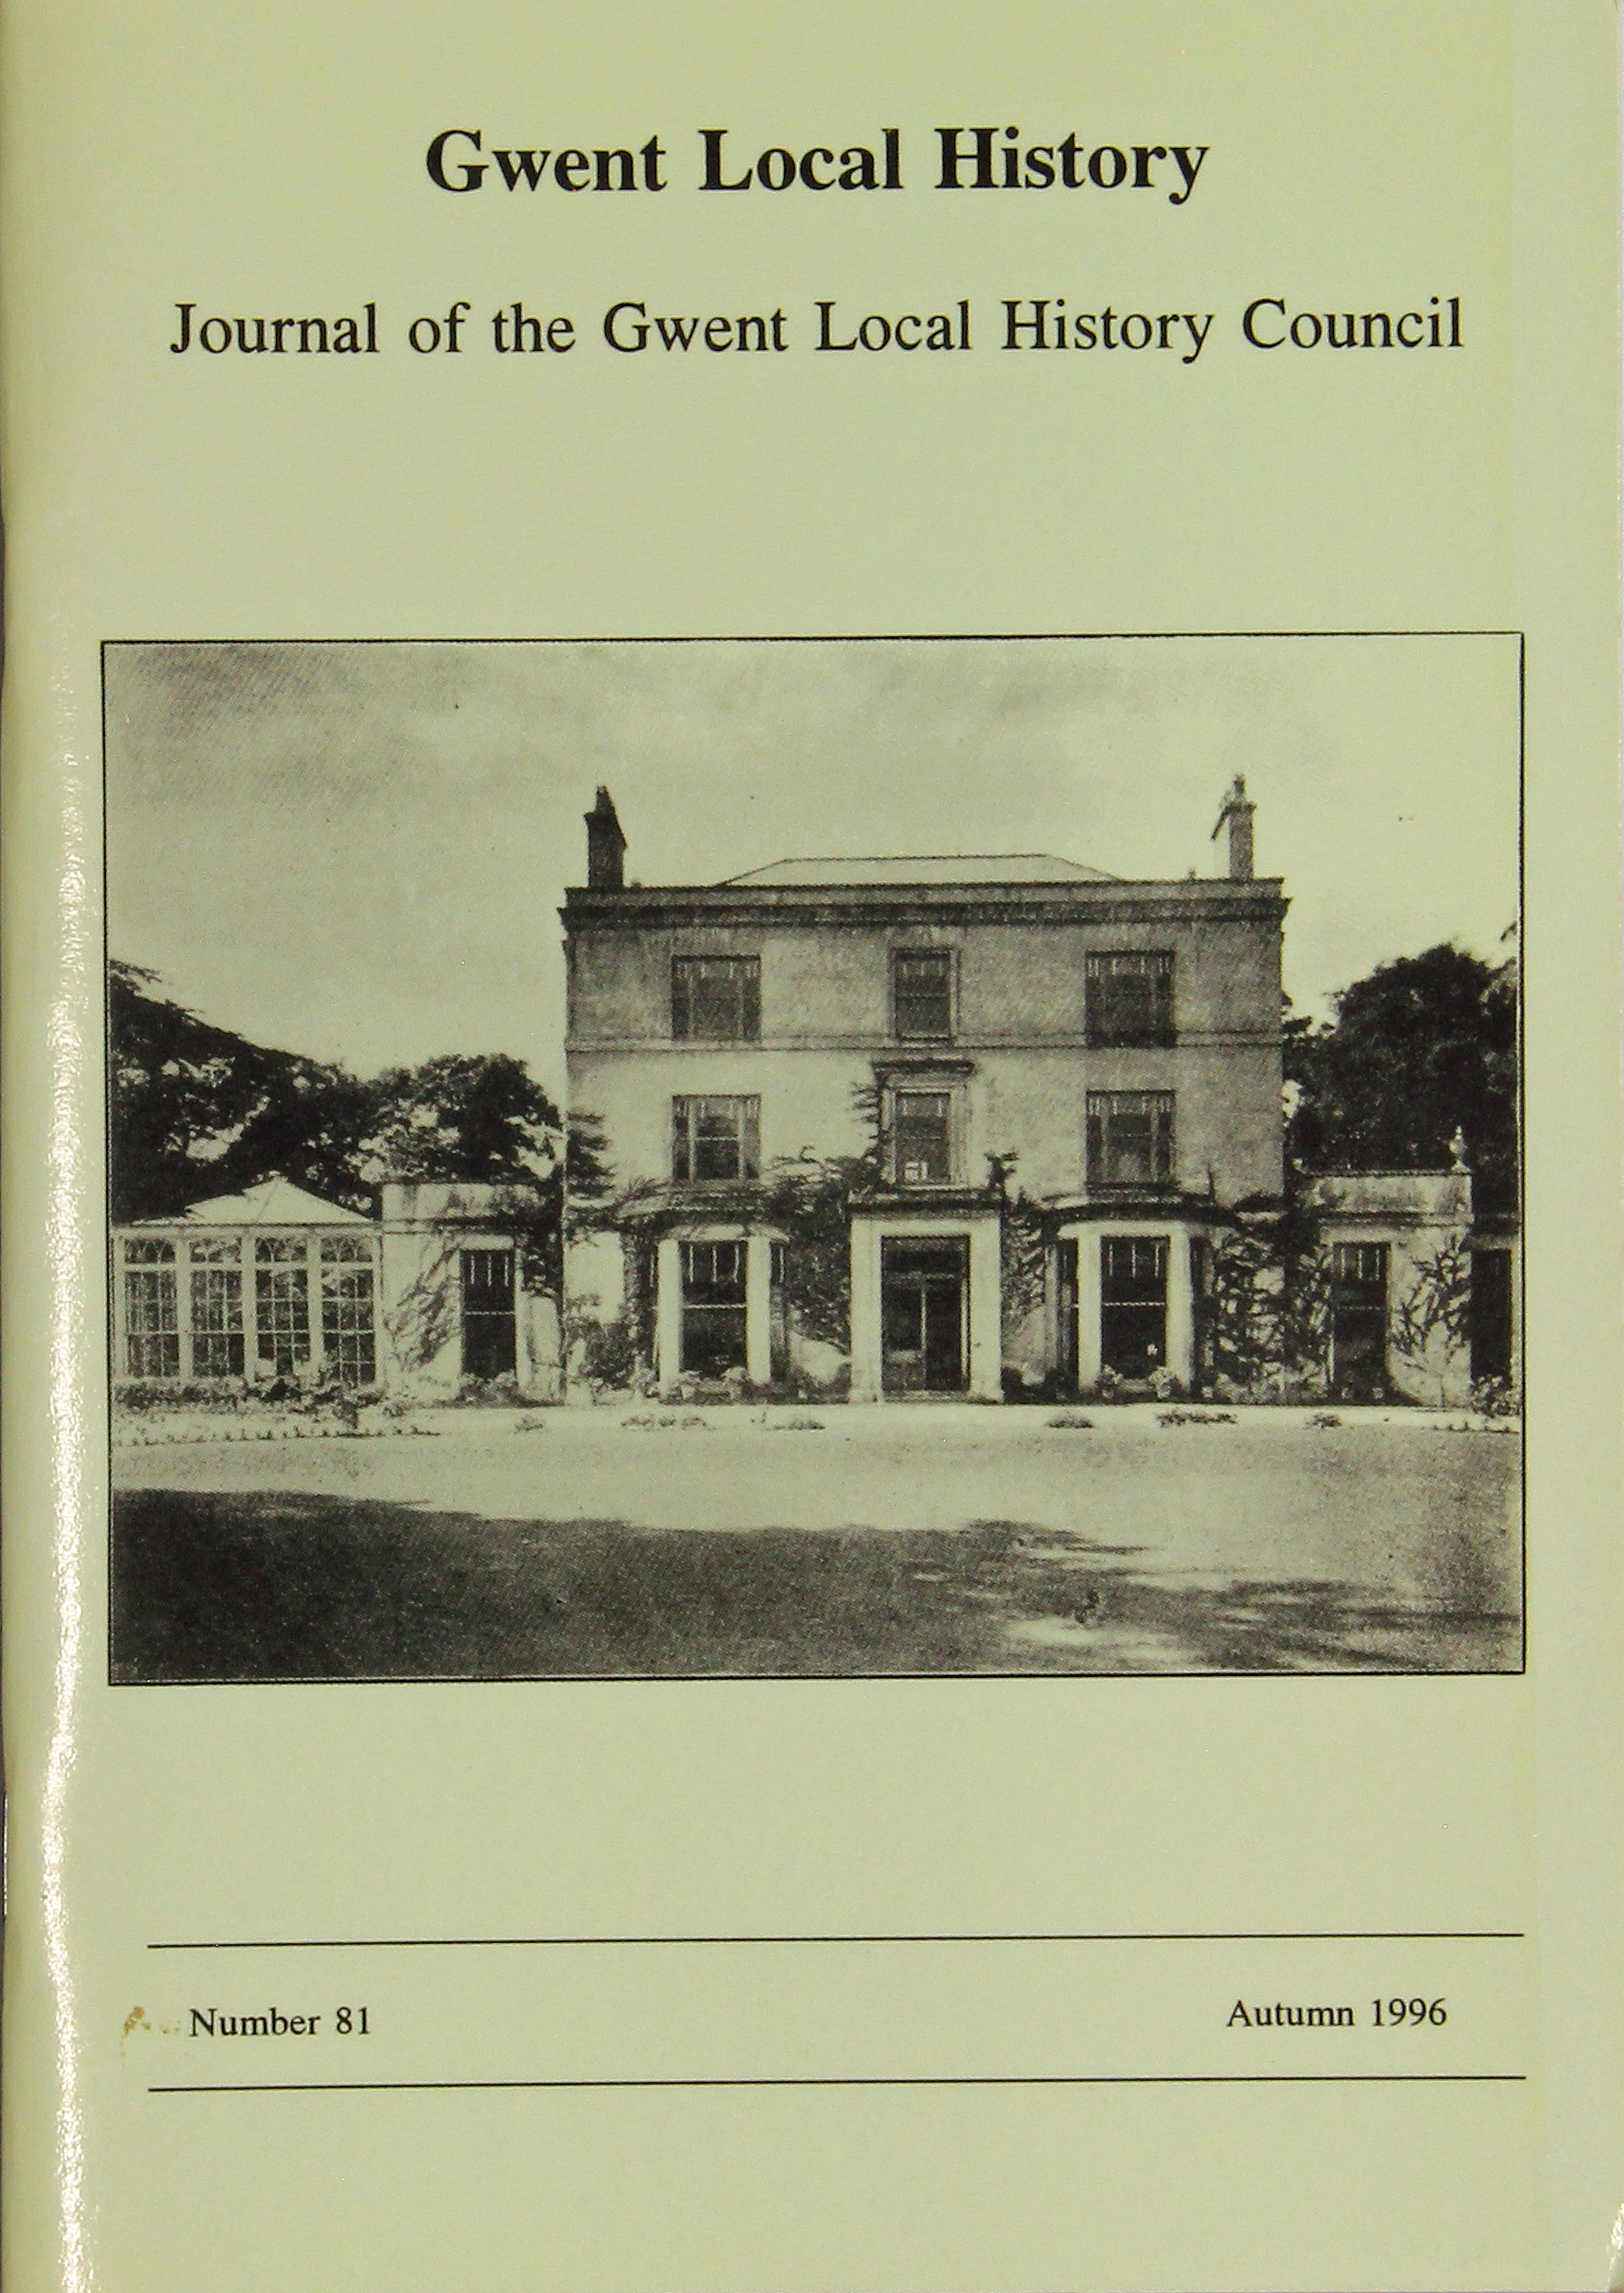 Gwent Local History: Journal of the Gwent Local History Council No.81, Autumn 1996, £2.00